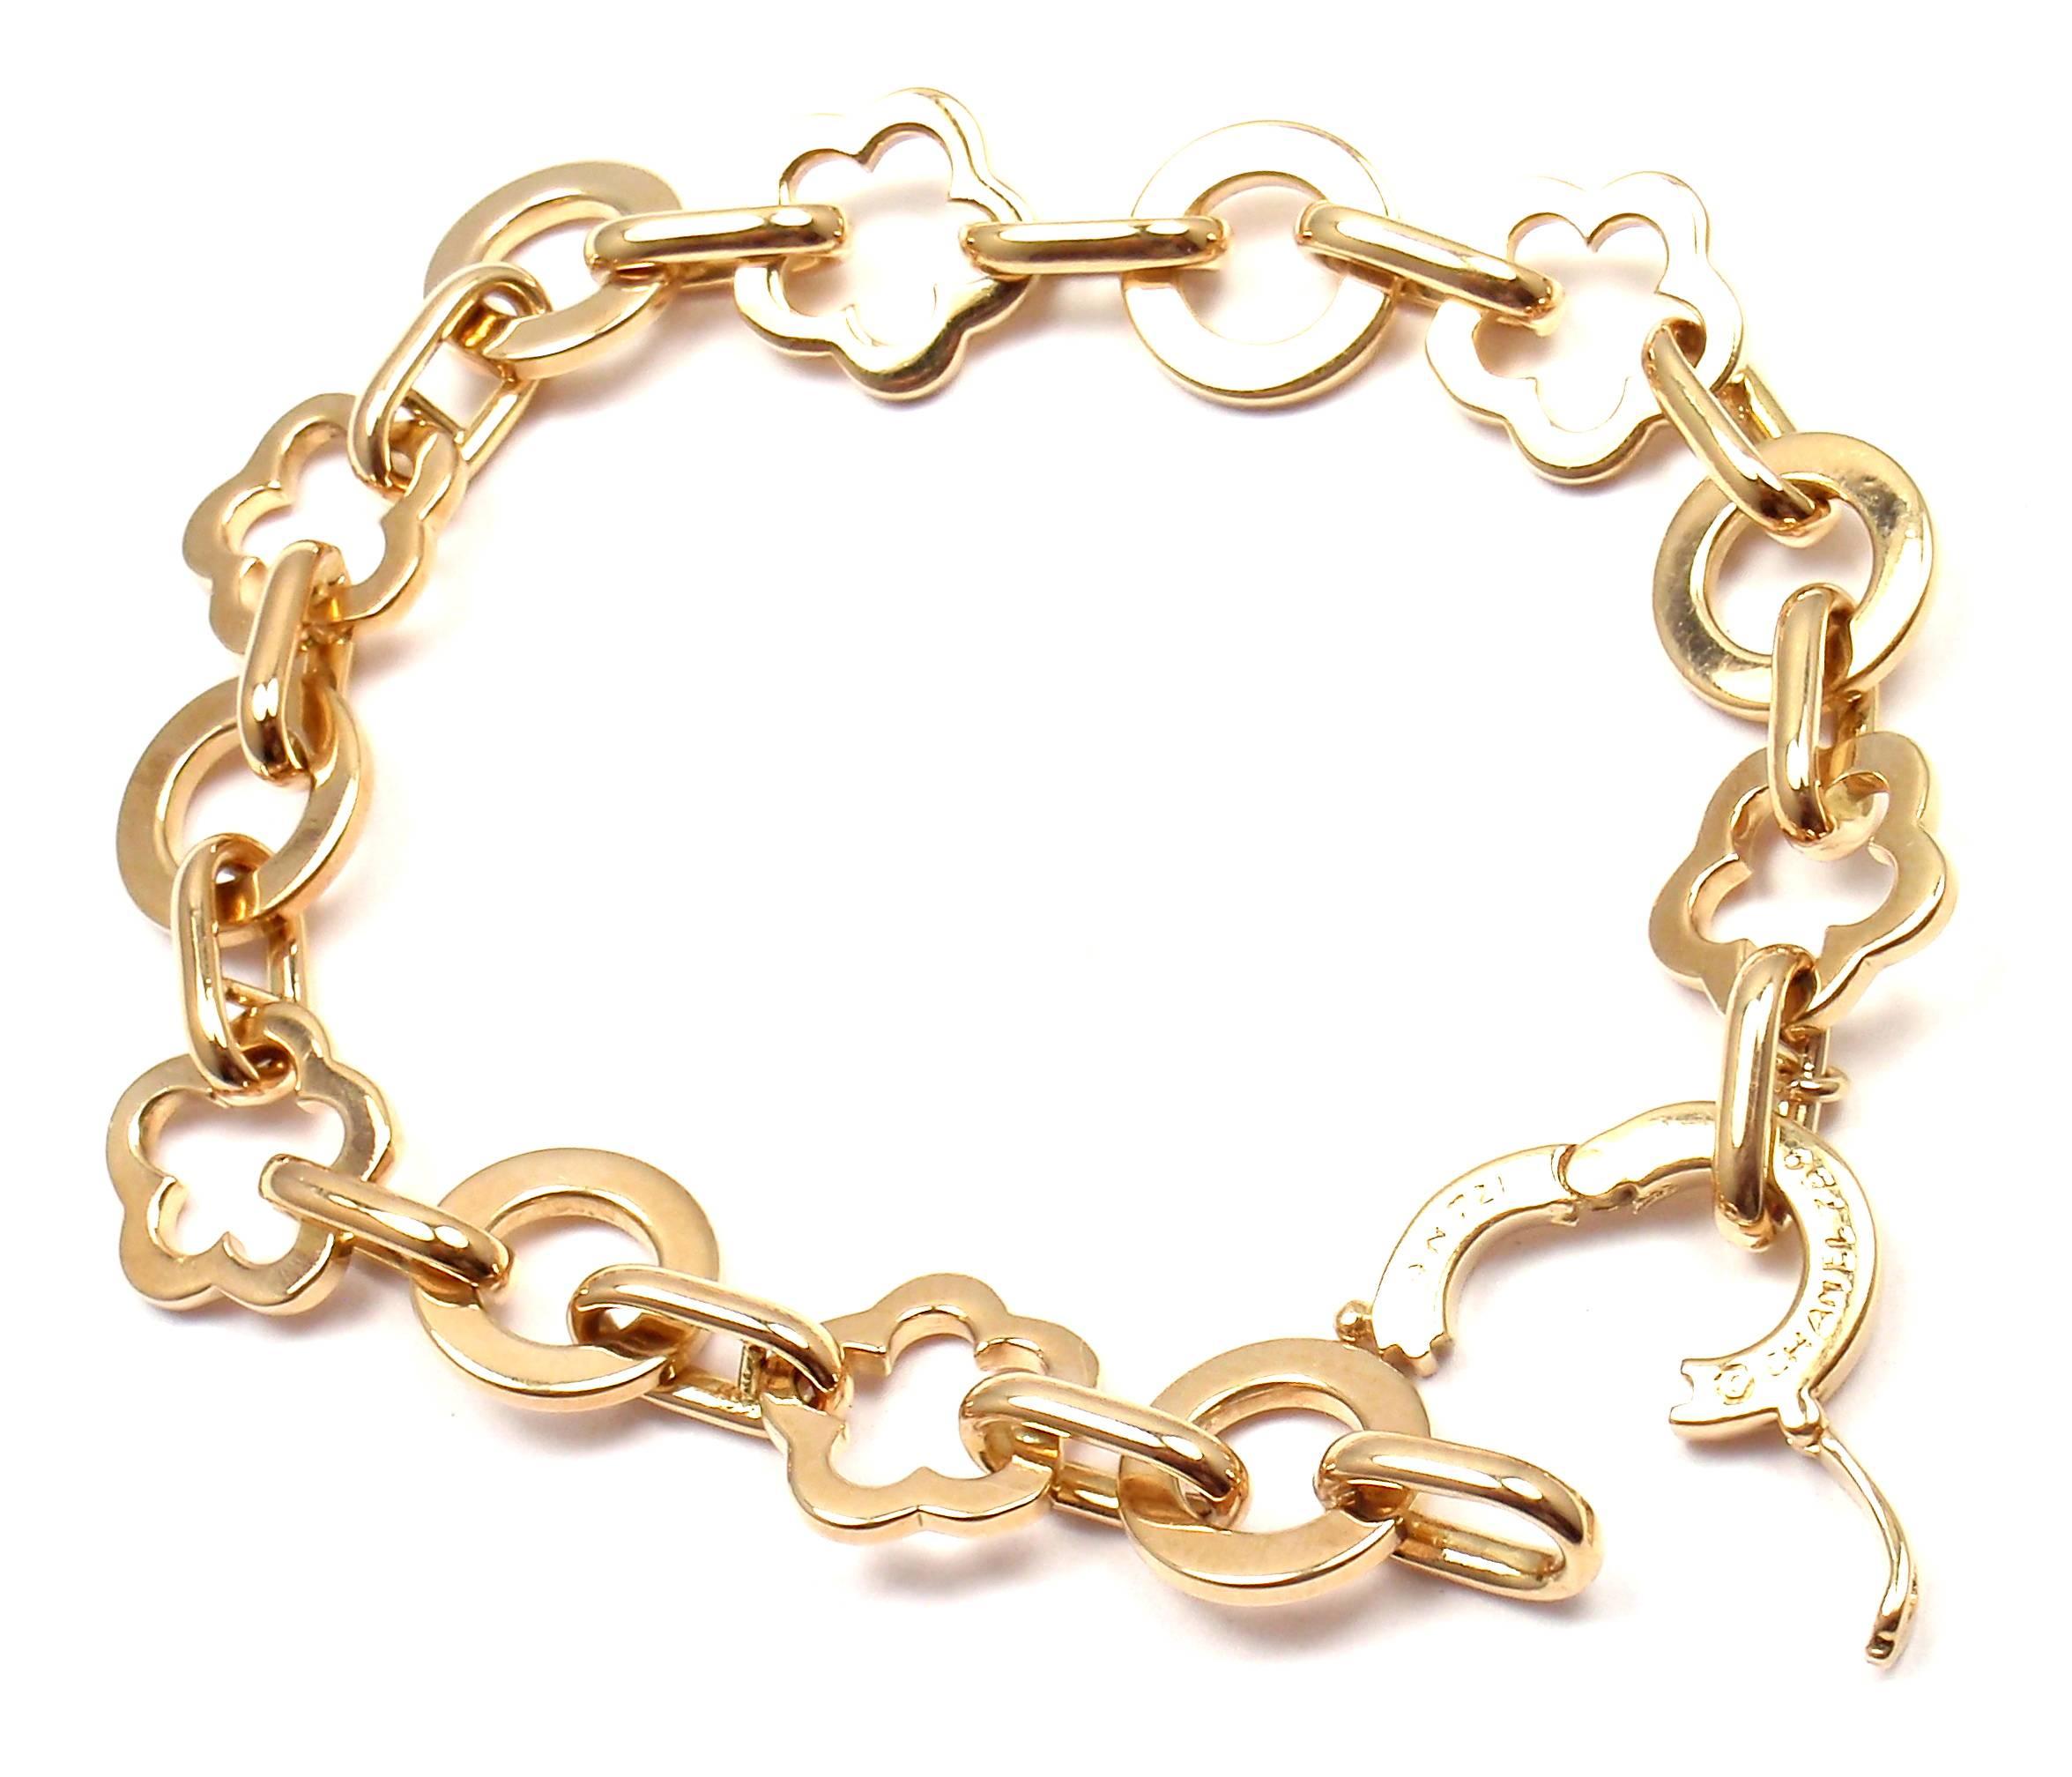 Chanel Yellow Gold Camelia Link Bracelet 

Details: 
Length: 7"
Weight: 24.4 grams
Width: 10mm
Stamped Hallmarks: Chanel 750 9N721
*Free Shipping within the United States*

YOUR PRICE: $3,450

T1418mned